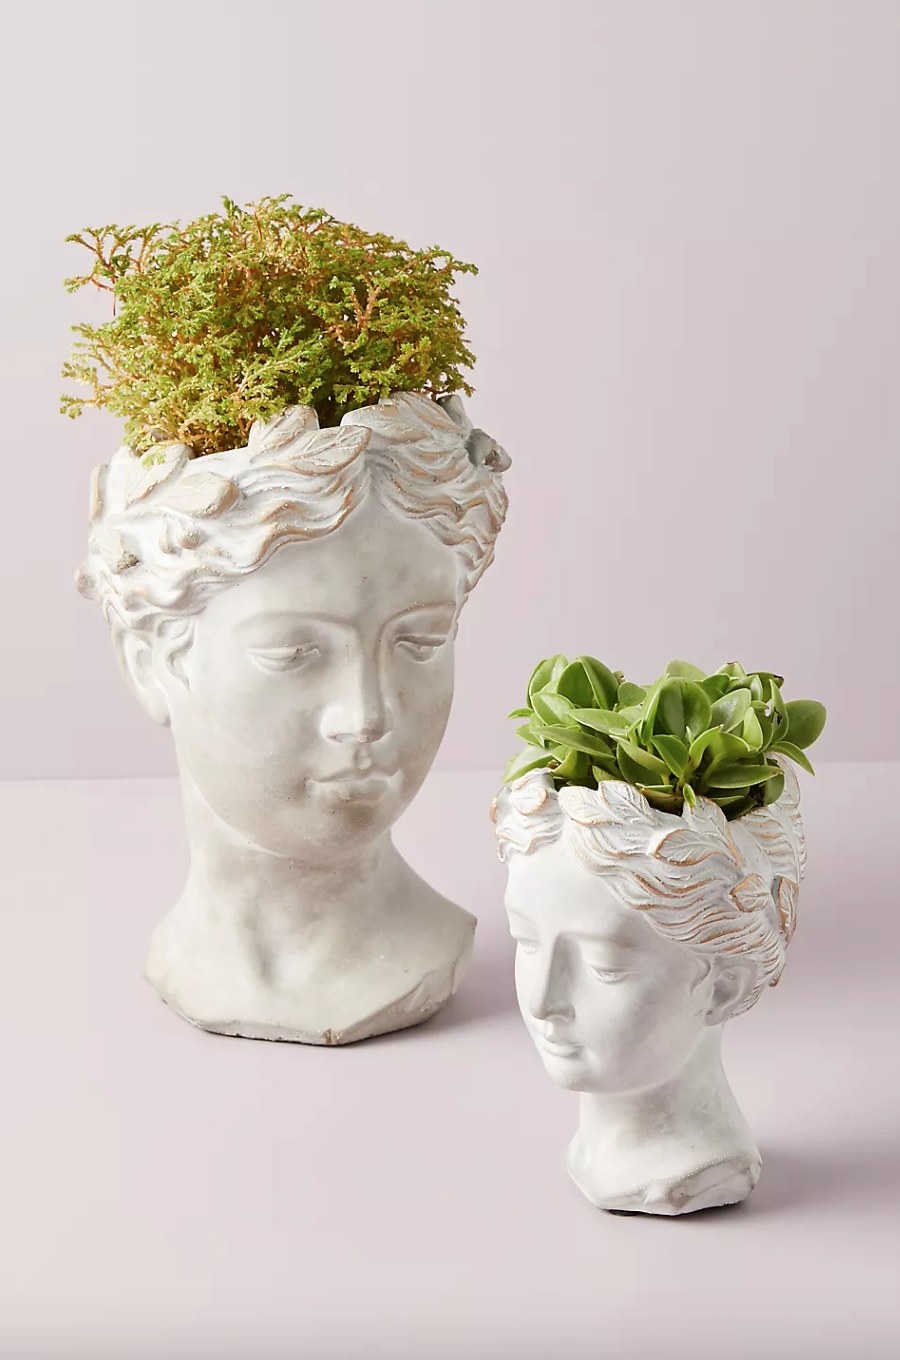 the two sizes of head-shaped pots, both with plants in the top